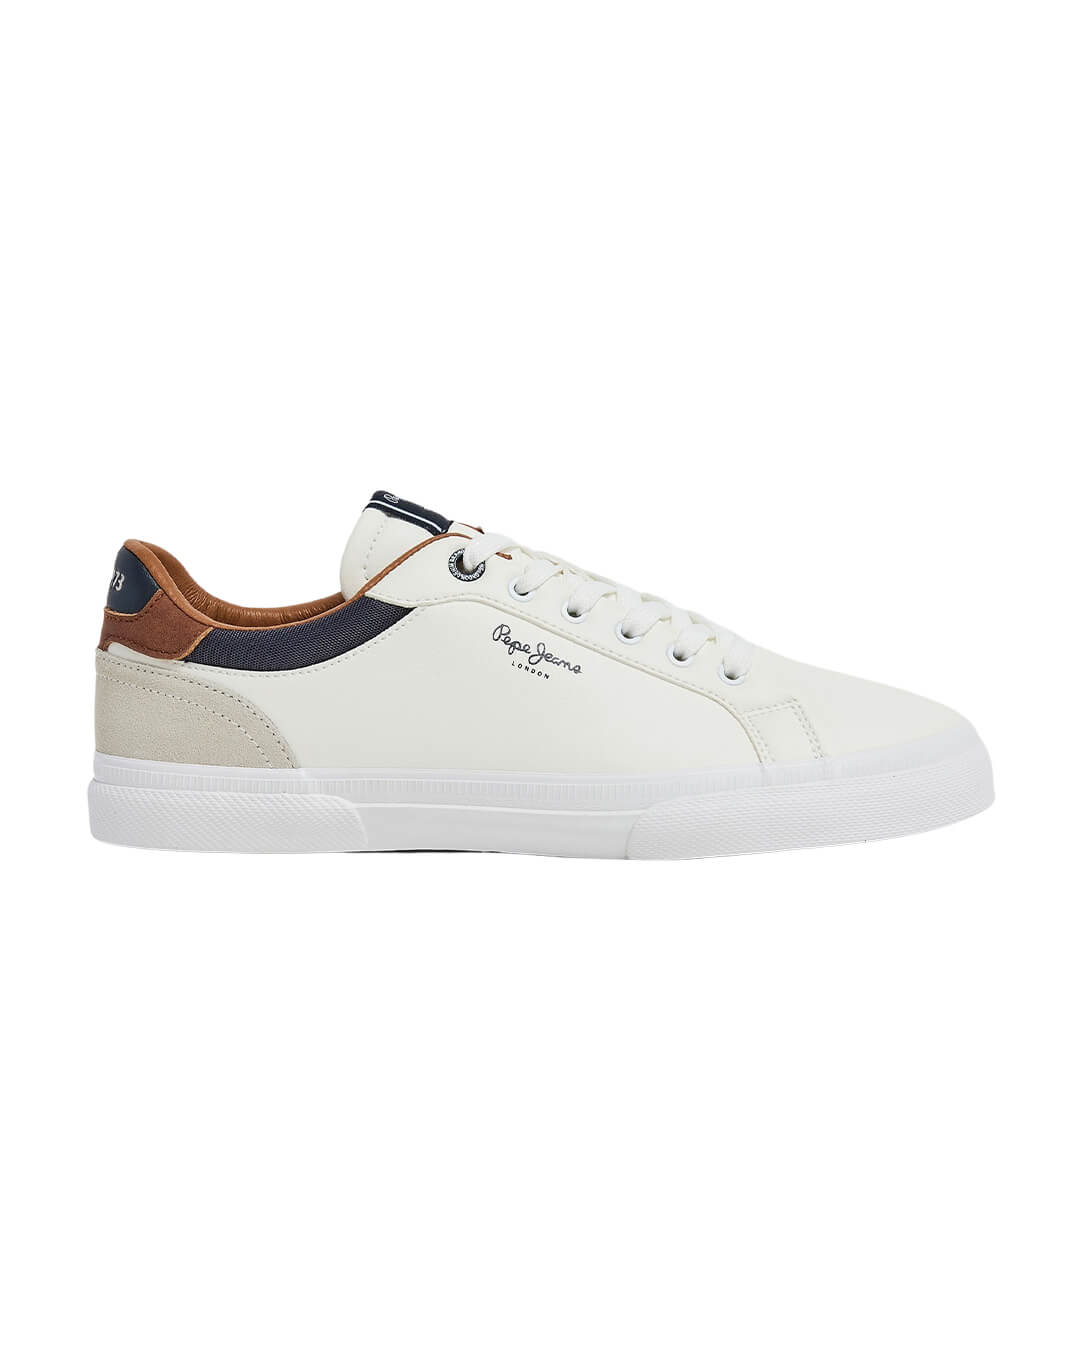 Pepe Jeans Shoes Pepe Jeans Kenton White Court Sneakers